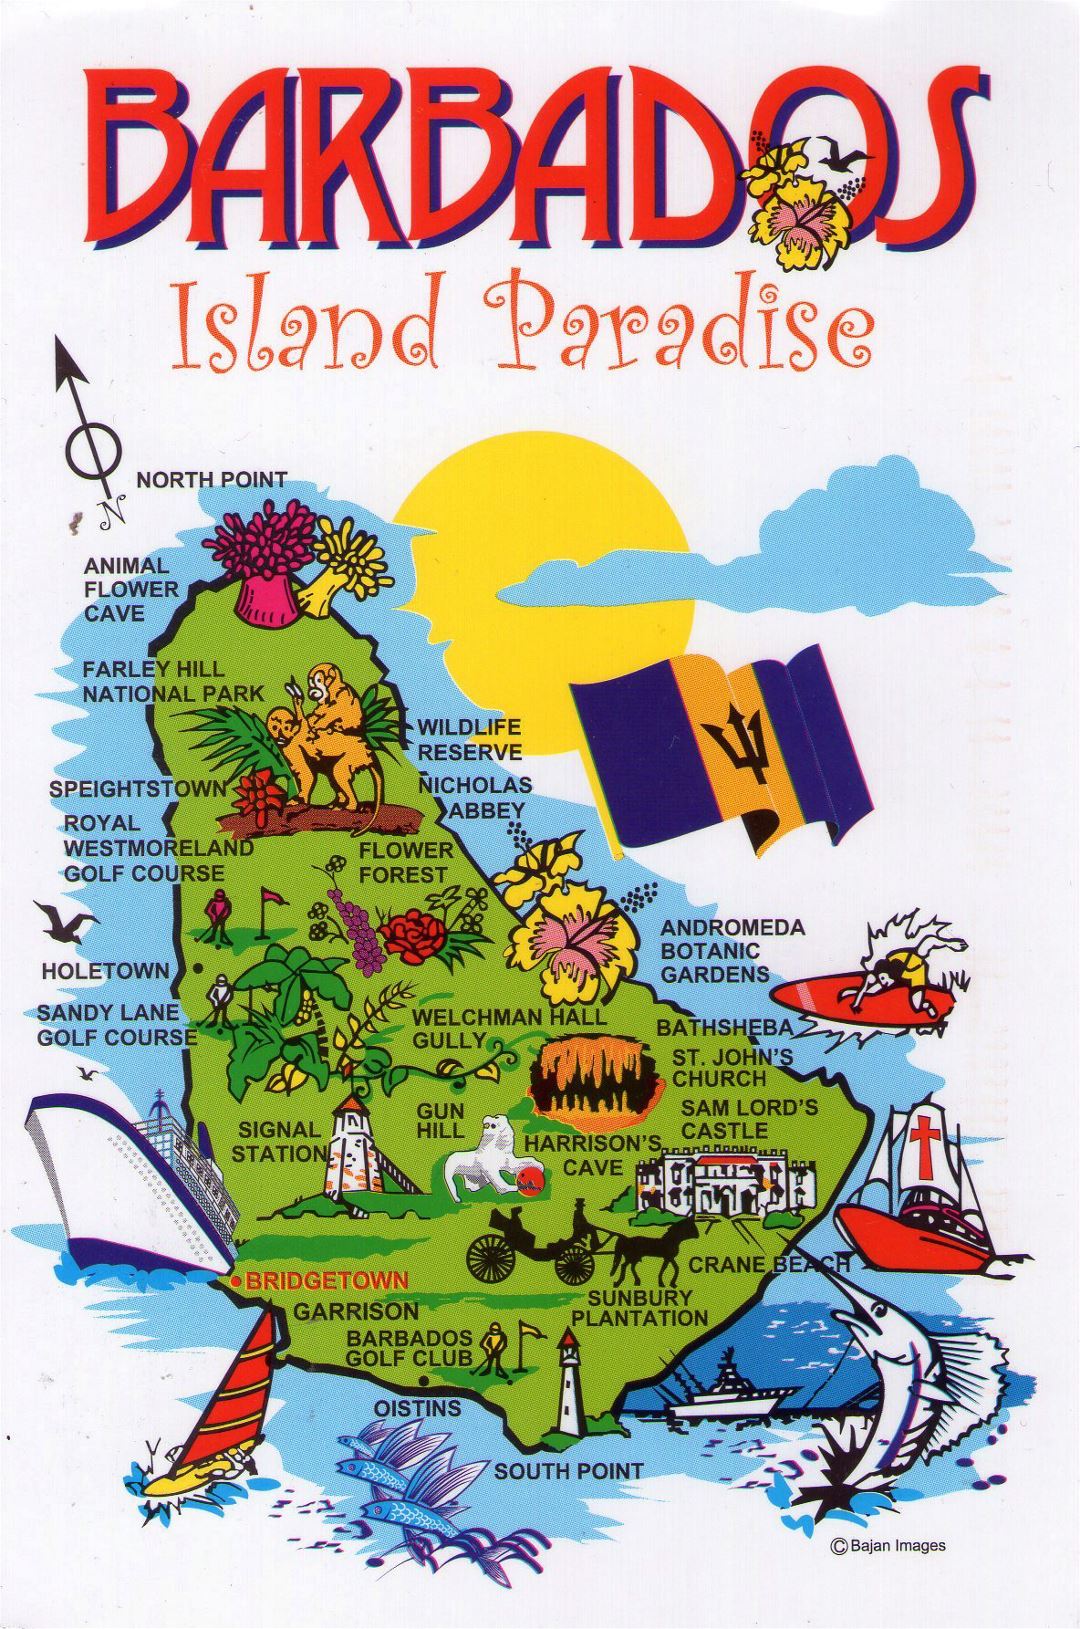 Large Barbados travel illustrated map